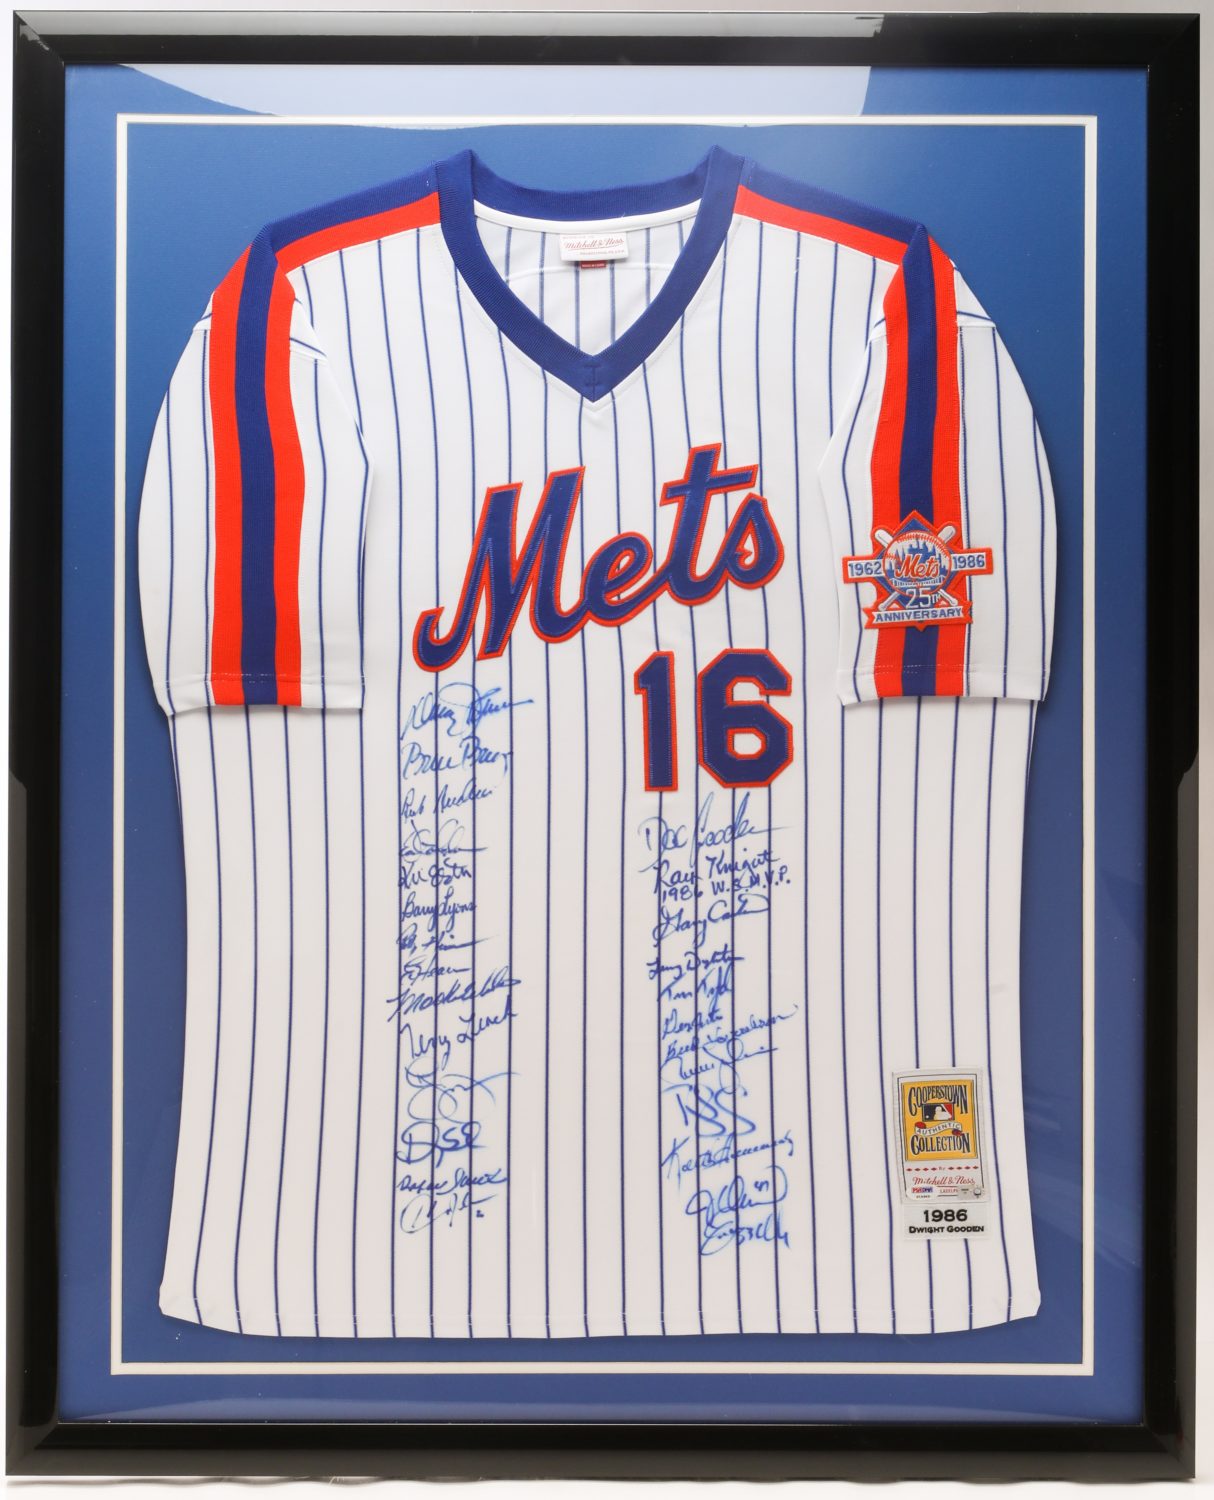 Dwight Gooden Jersey Signed by 1986 World Series Team